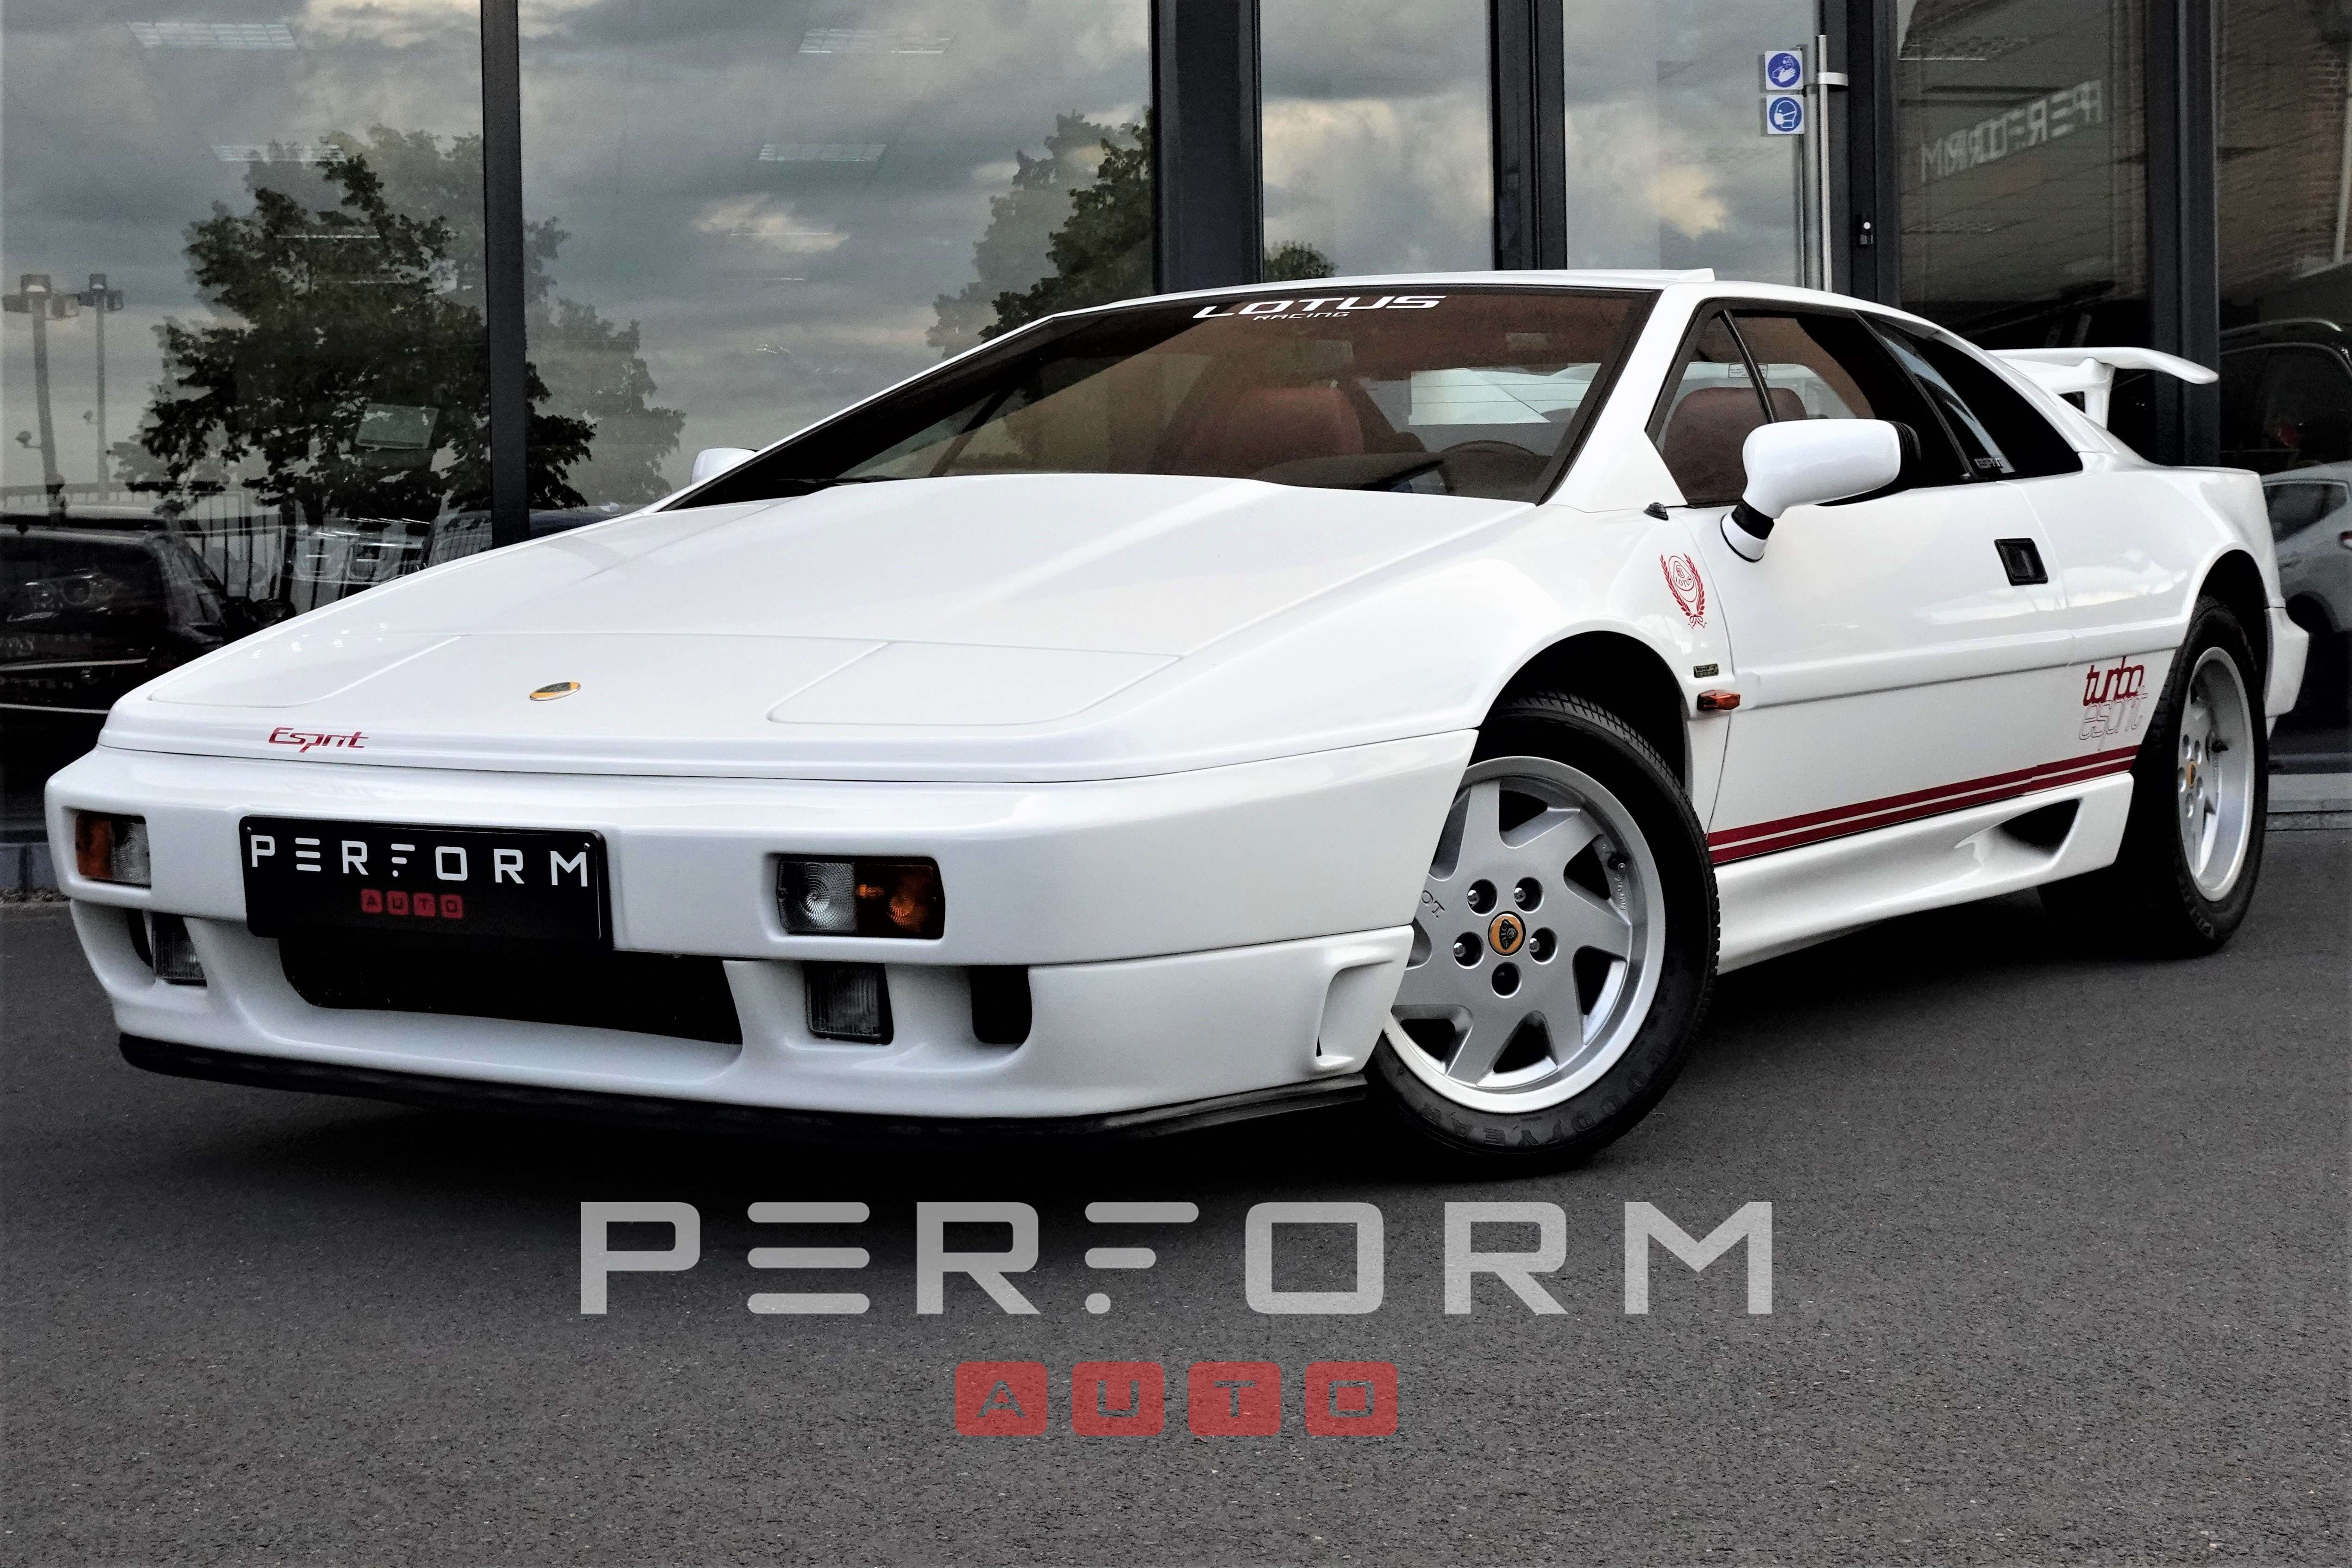 Lotus Esprit Coupe in White used in Dadizele for € 52,900.-